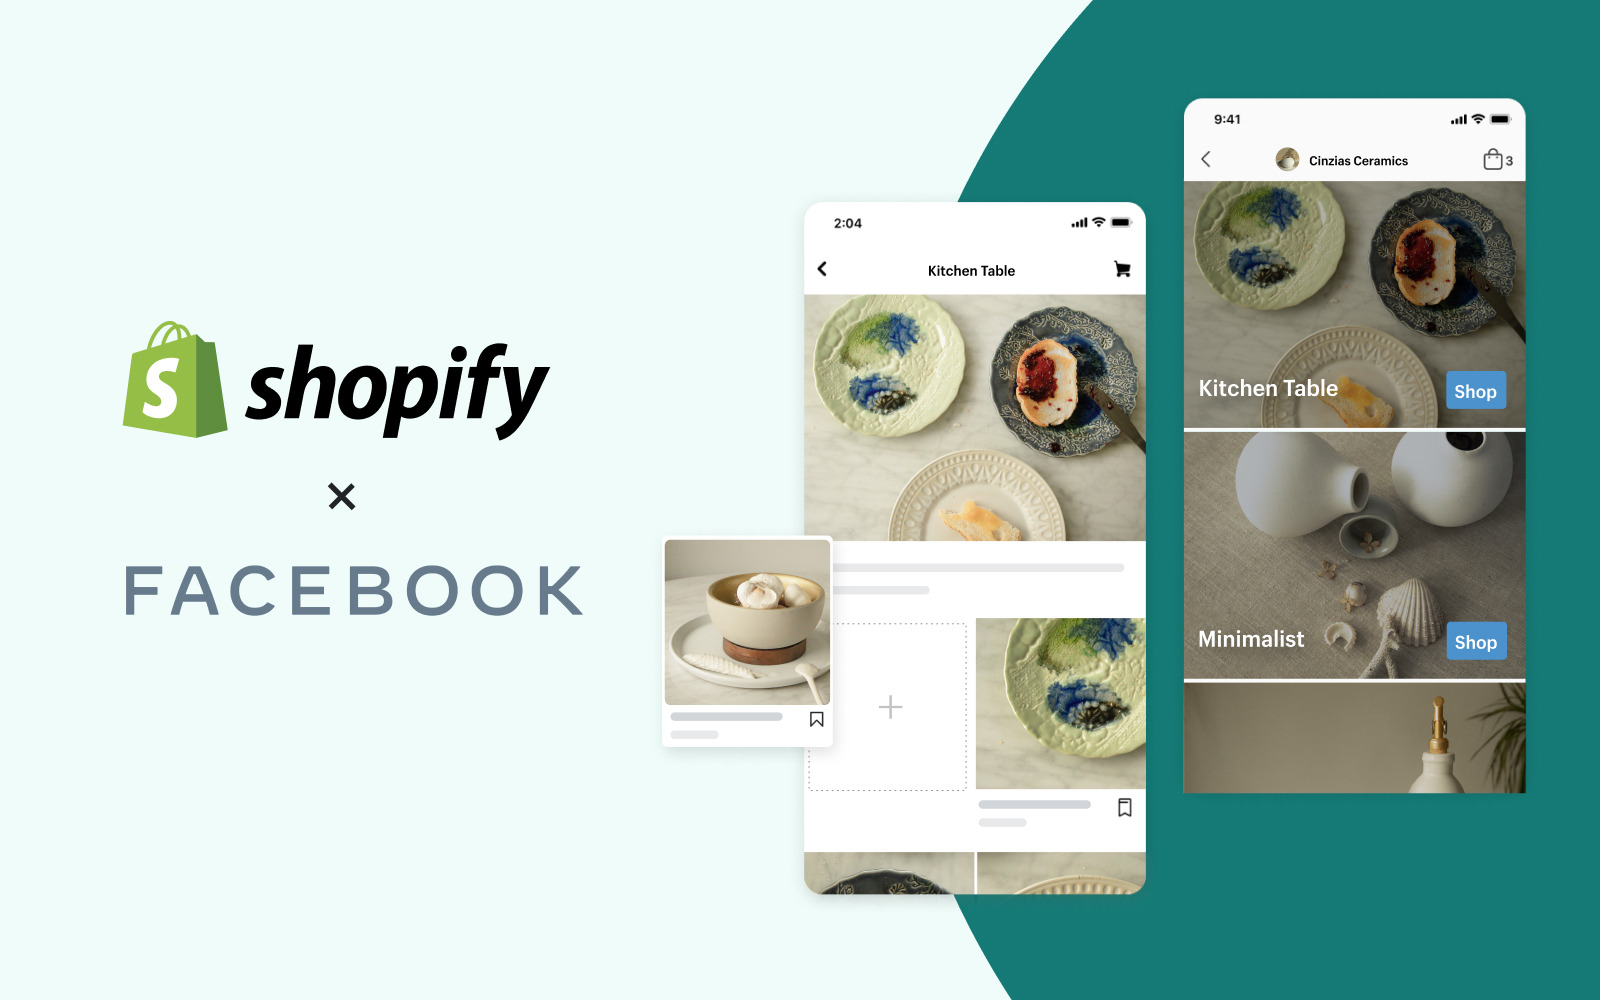 Shopify and Facebook